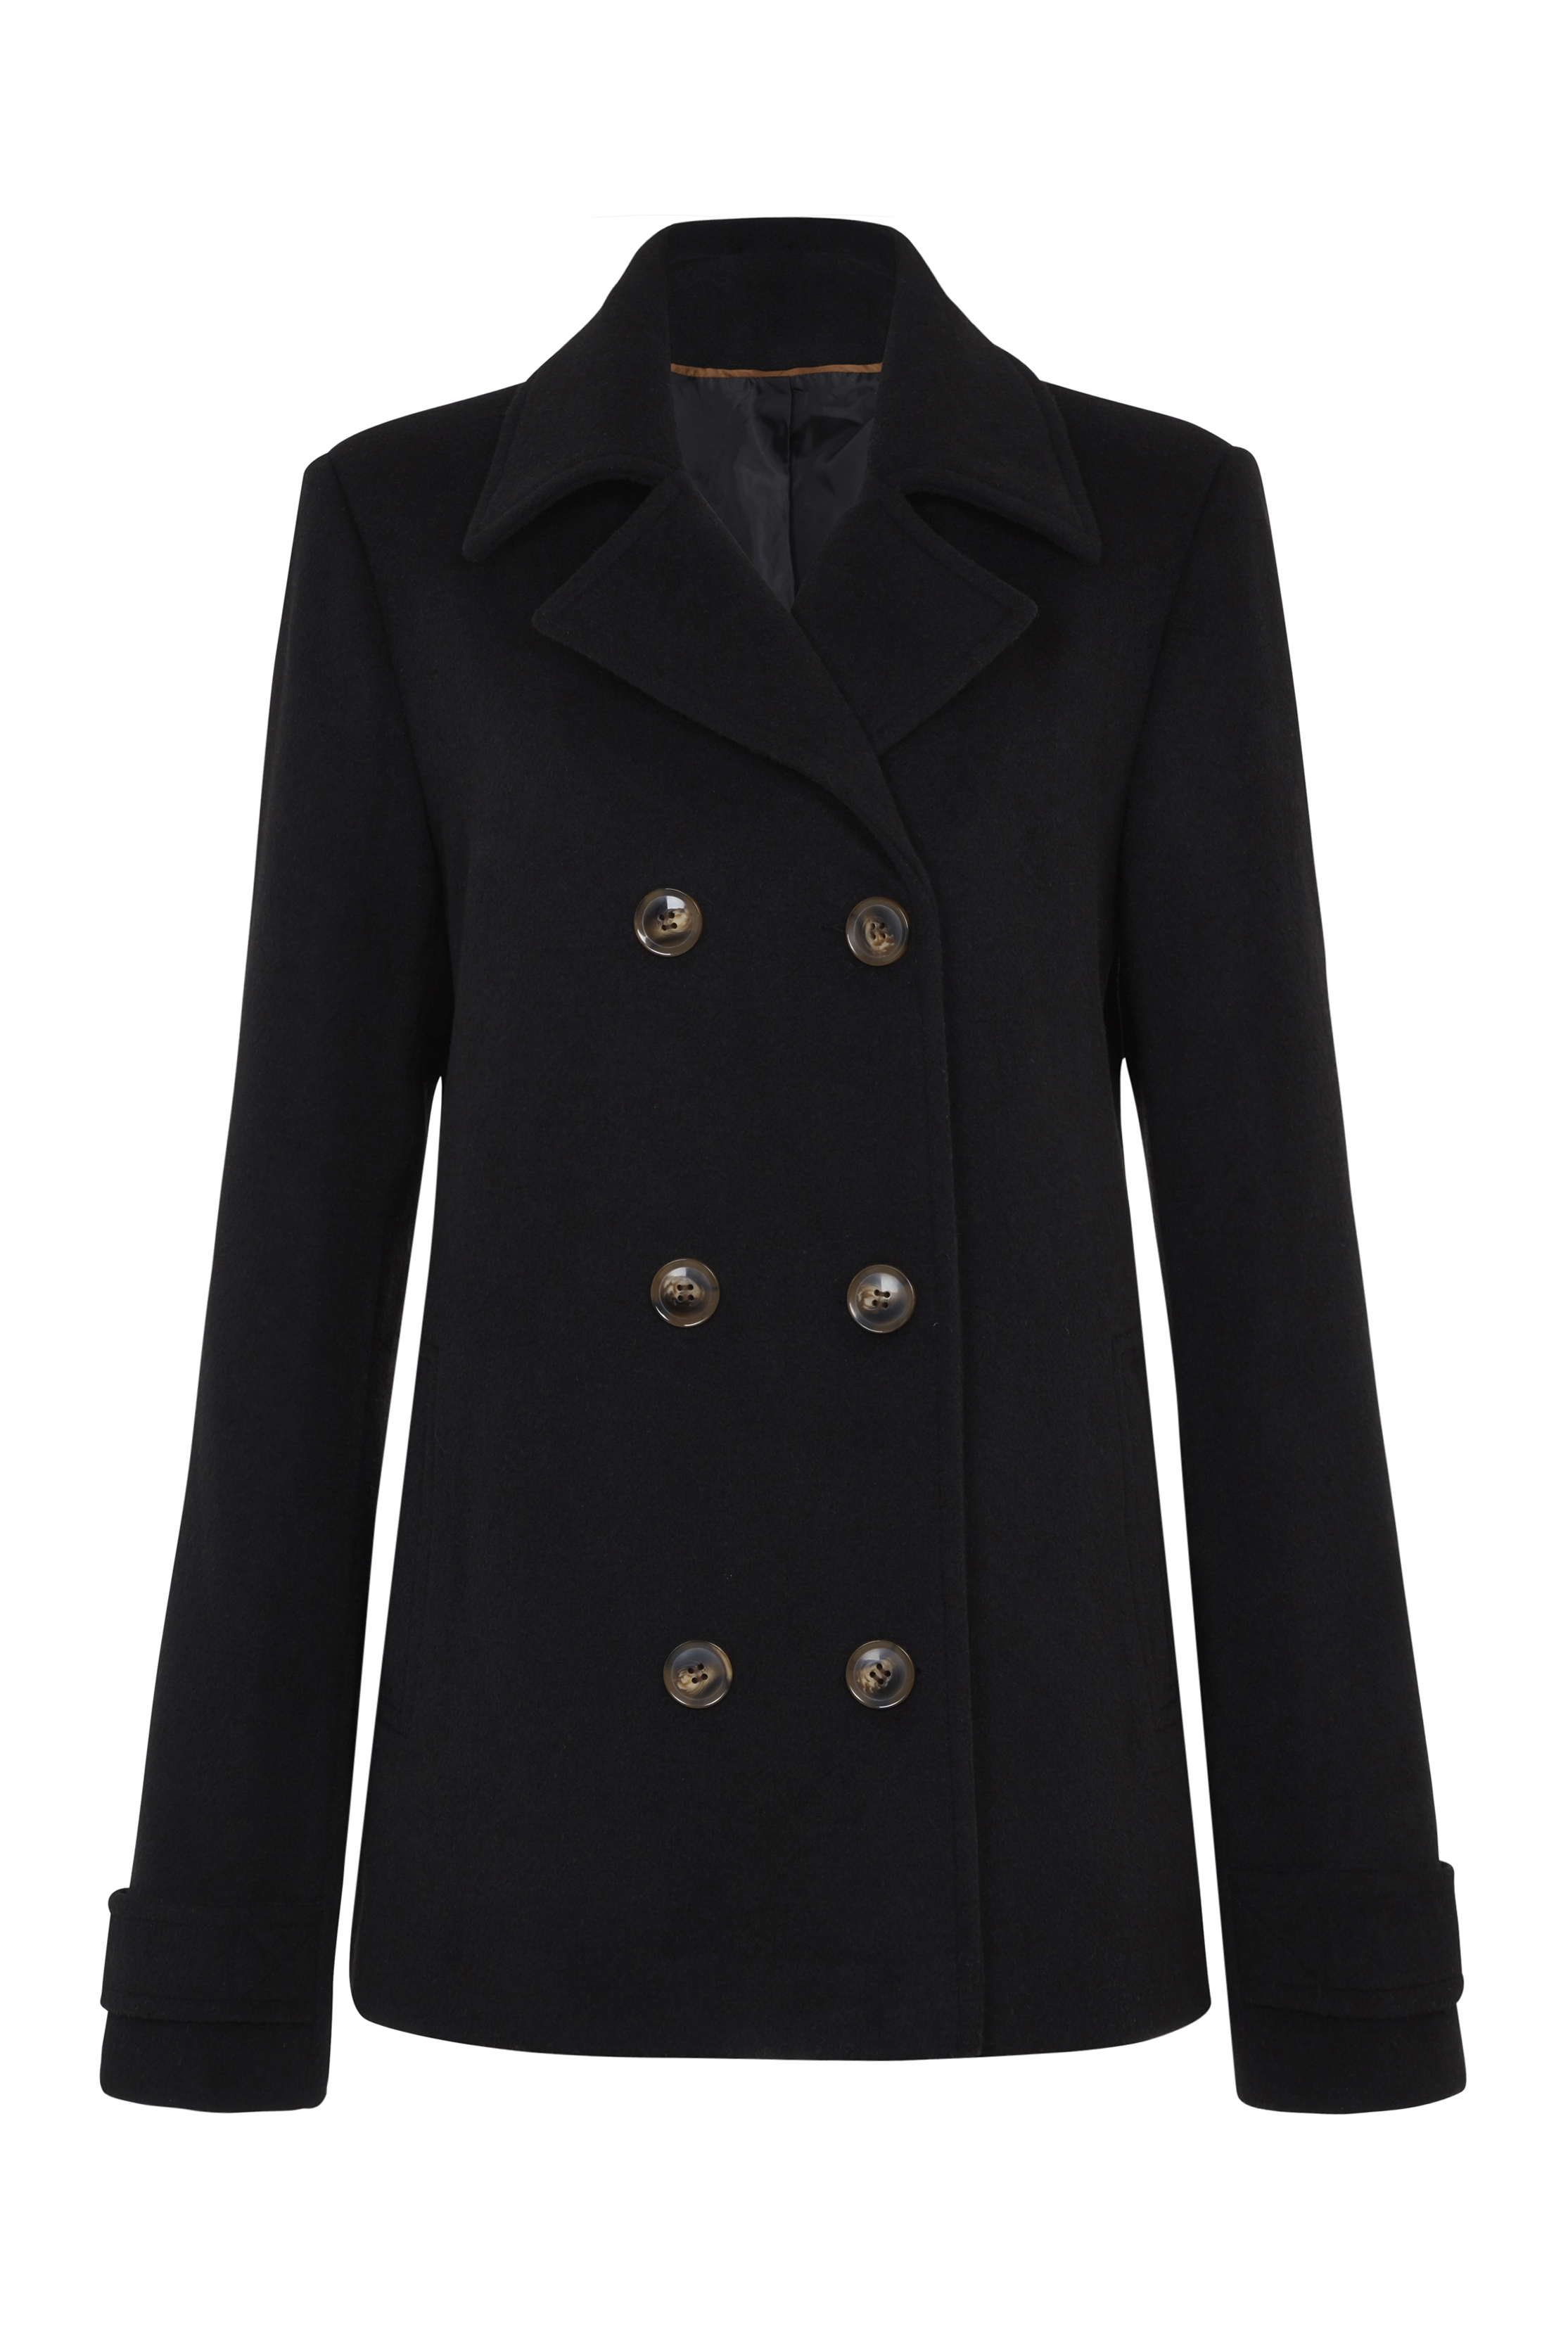 Black Wool Double Breasted Pea Coat | Long Tall Sally